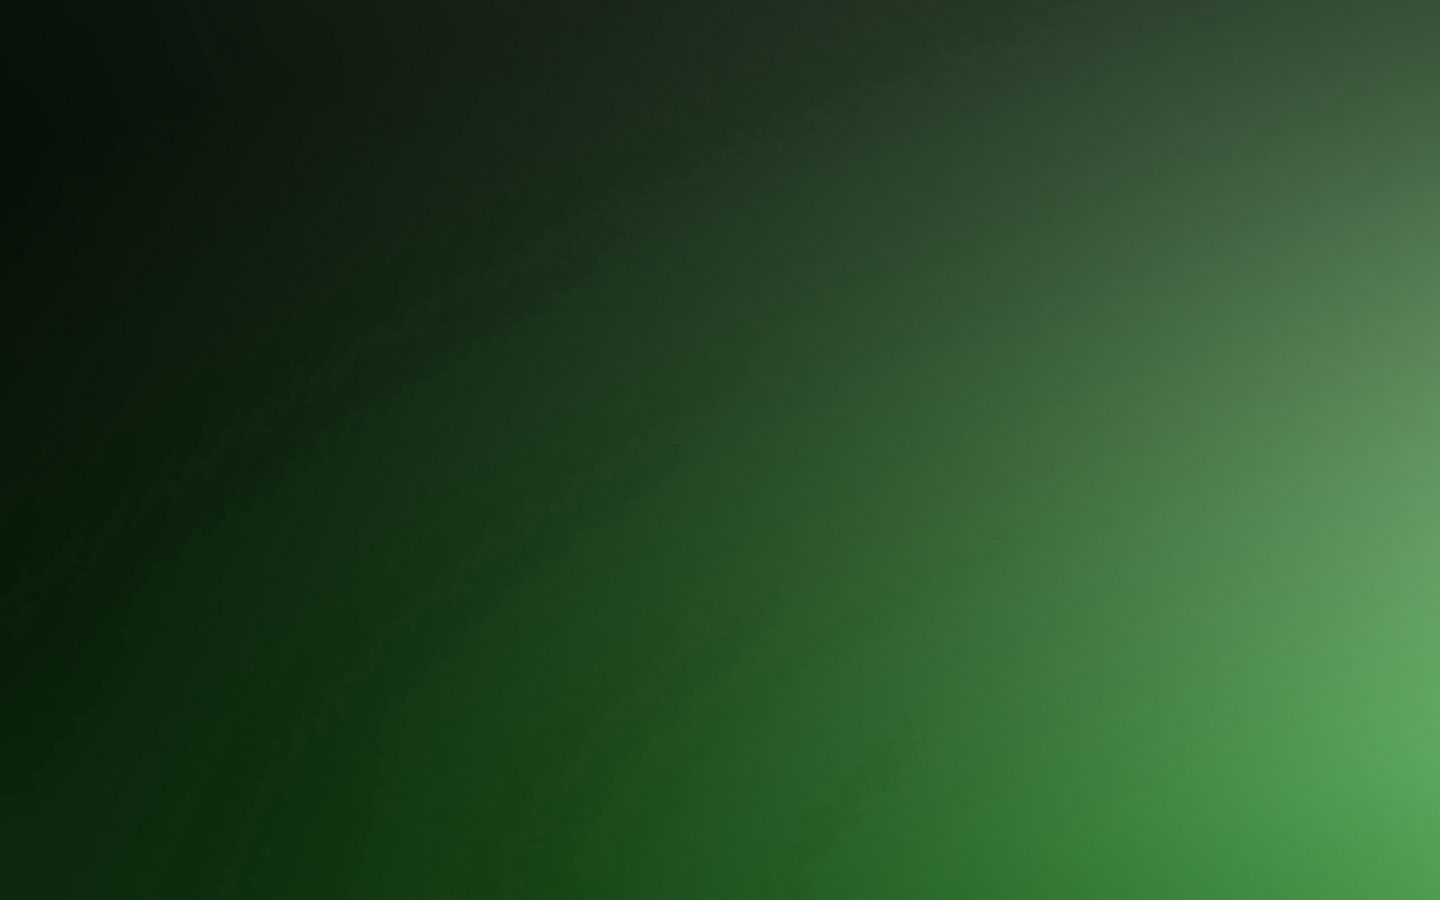 Download wallpaper 1440x900 green, background, texture, solid, color widescreen 16:10 HD background